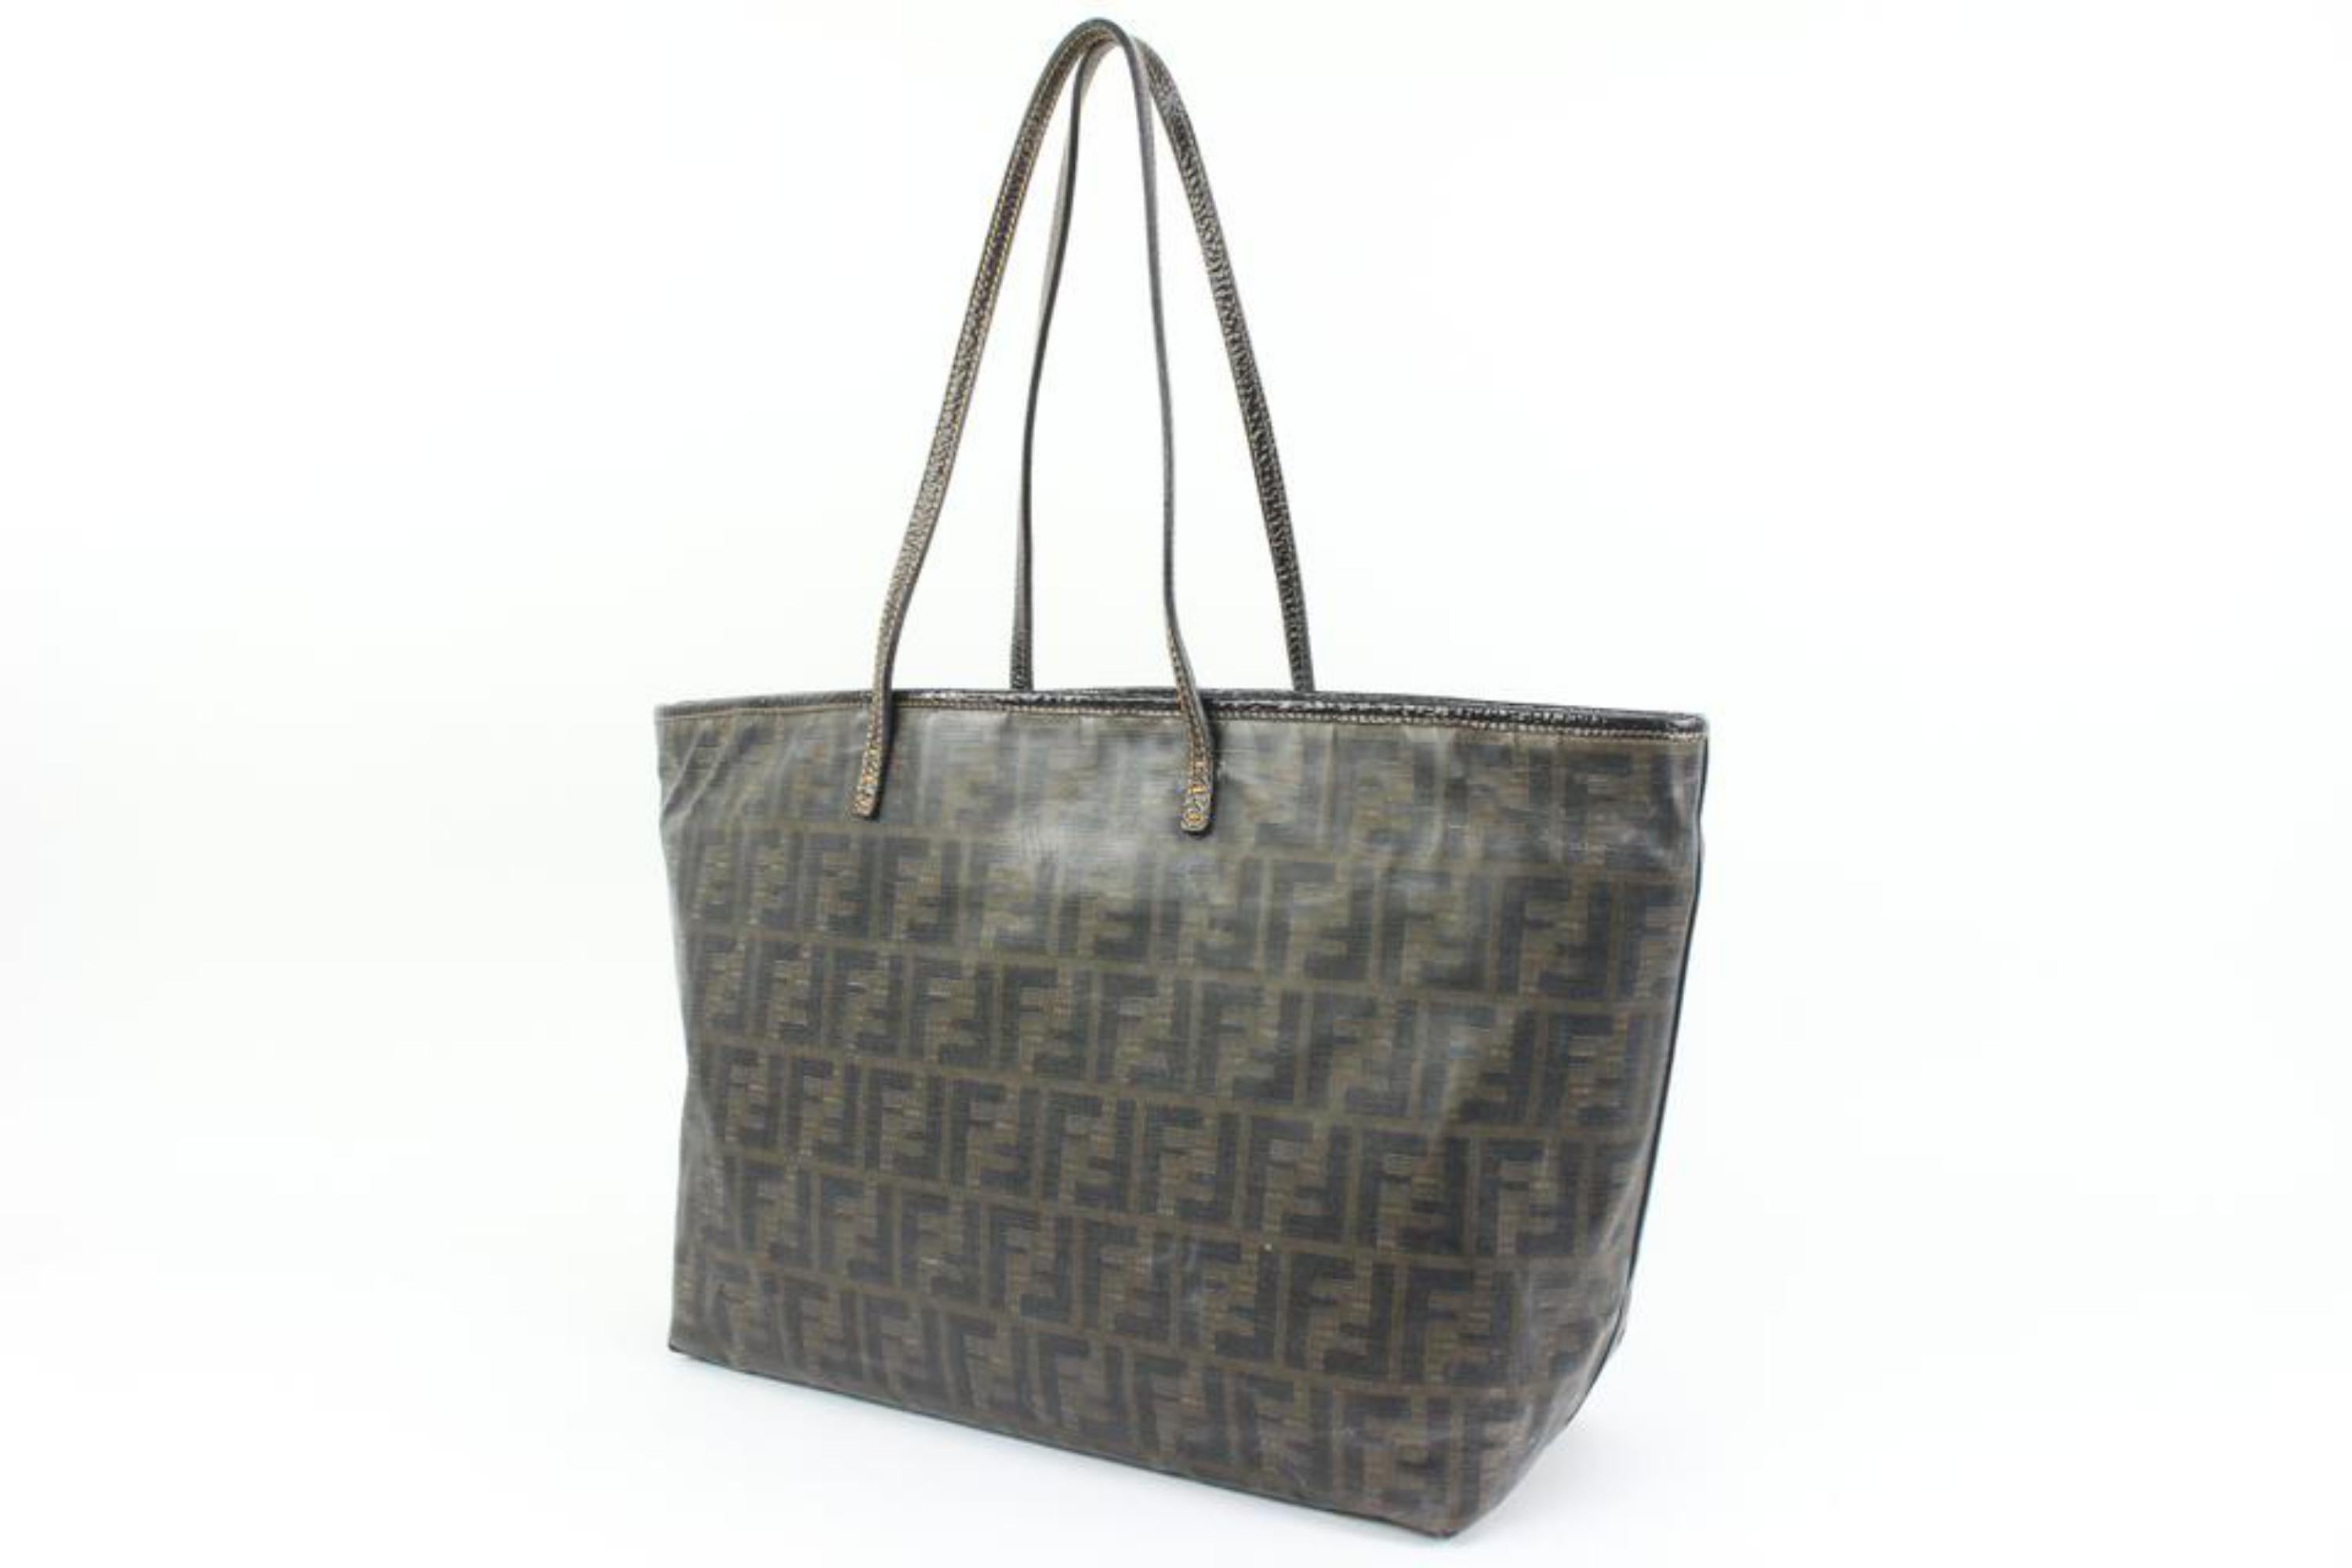 Fendi Brown Monogram FF Zucca Roll Tote Shopper Upcycle Ready 60f325s
Date Code/Serial Number: 2370-8BH126-WTE-079
Made In: Italy
Measurements: Length:  18.5